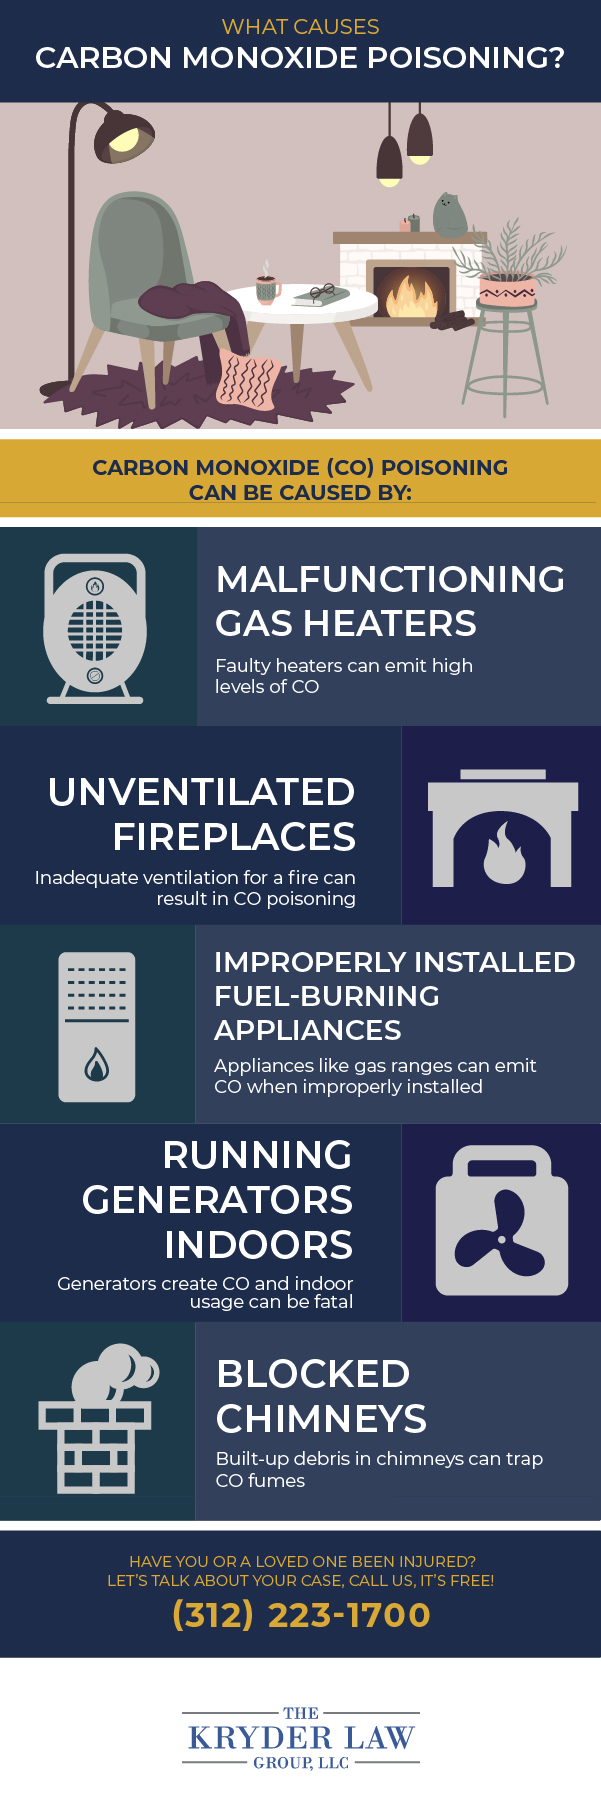 What Causes Carbon Monoxide Poisoning?